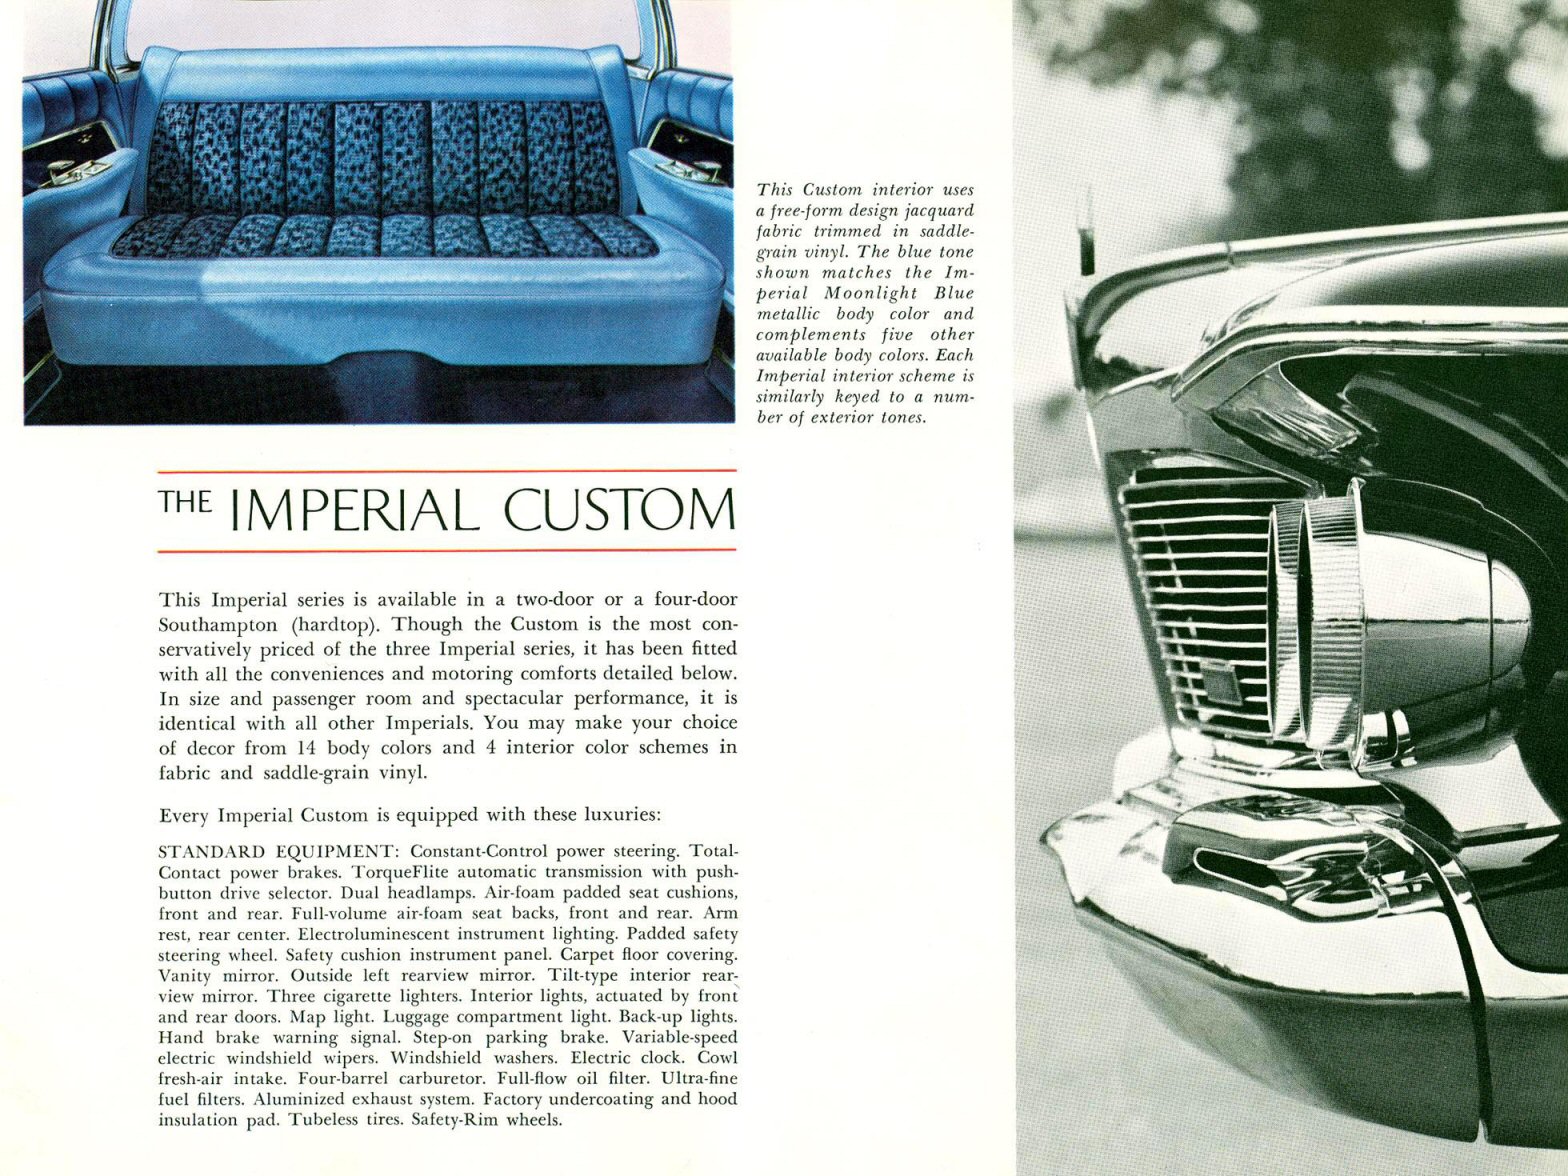 1962 Chrysler Imperial Brochure Page 7